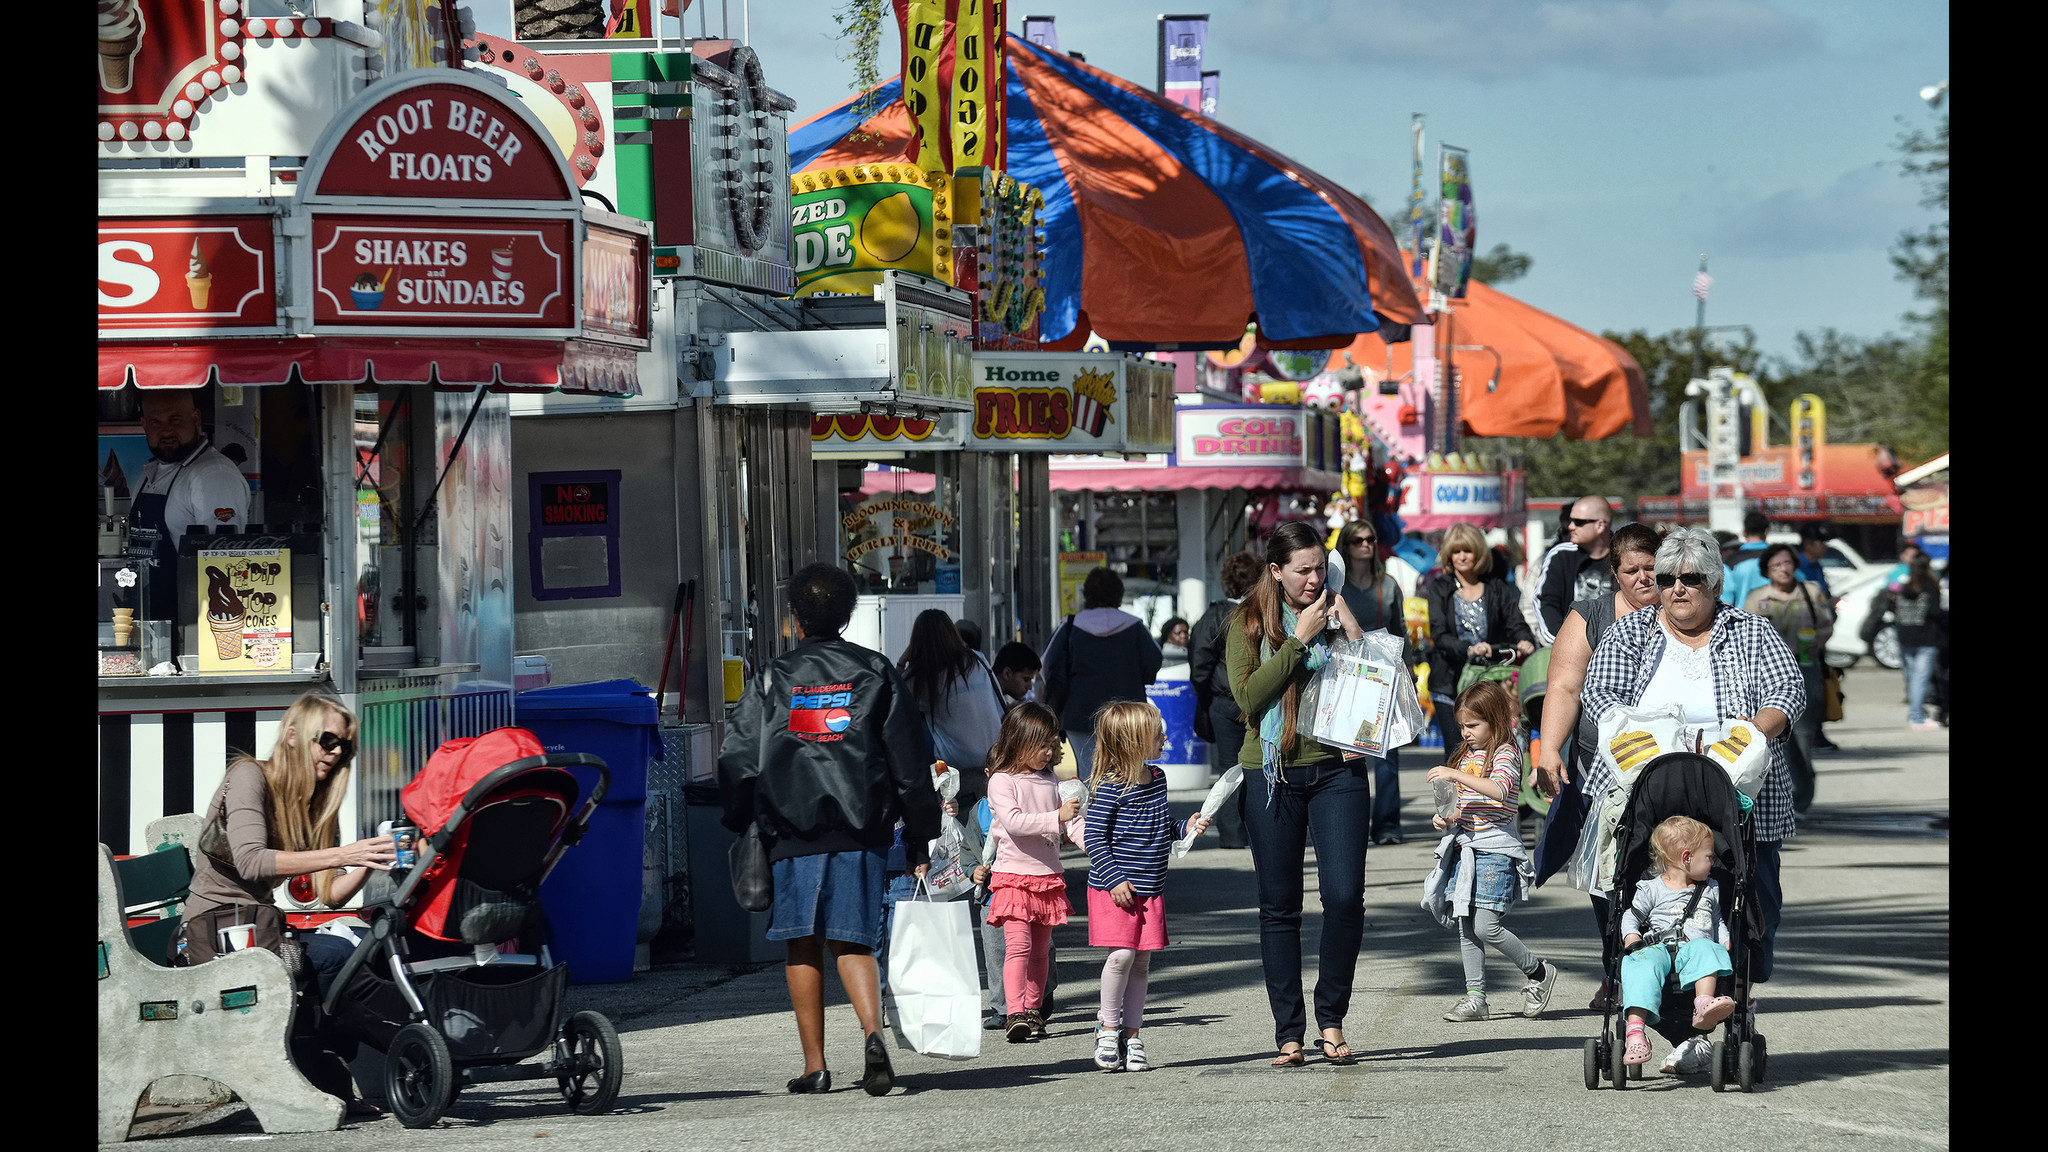 Free tickets to South Florida Fair from Palm Beach Outlets Sun Sentinel